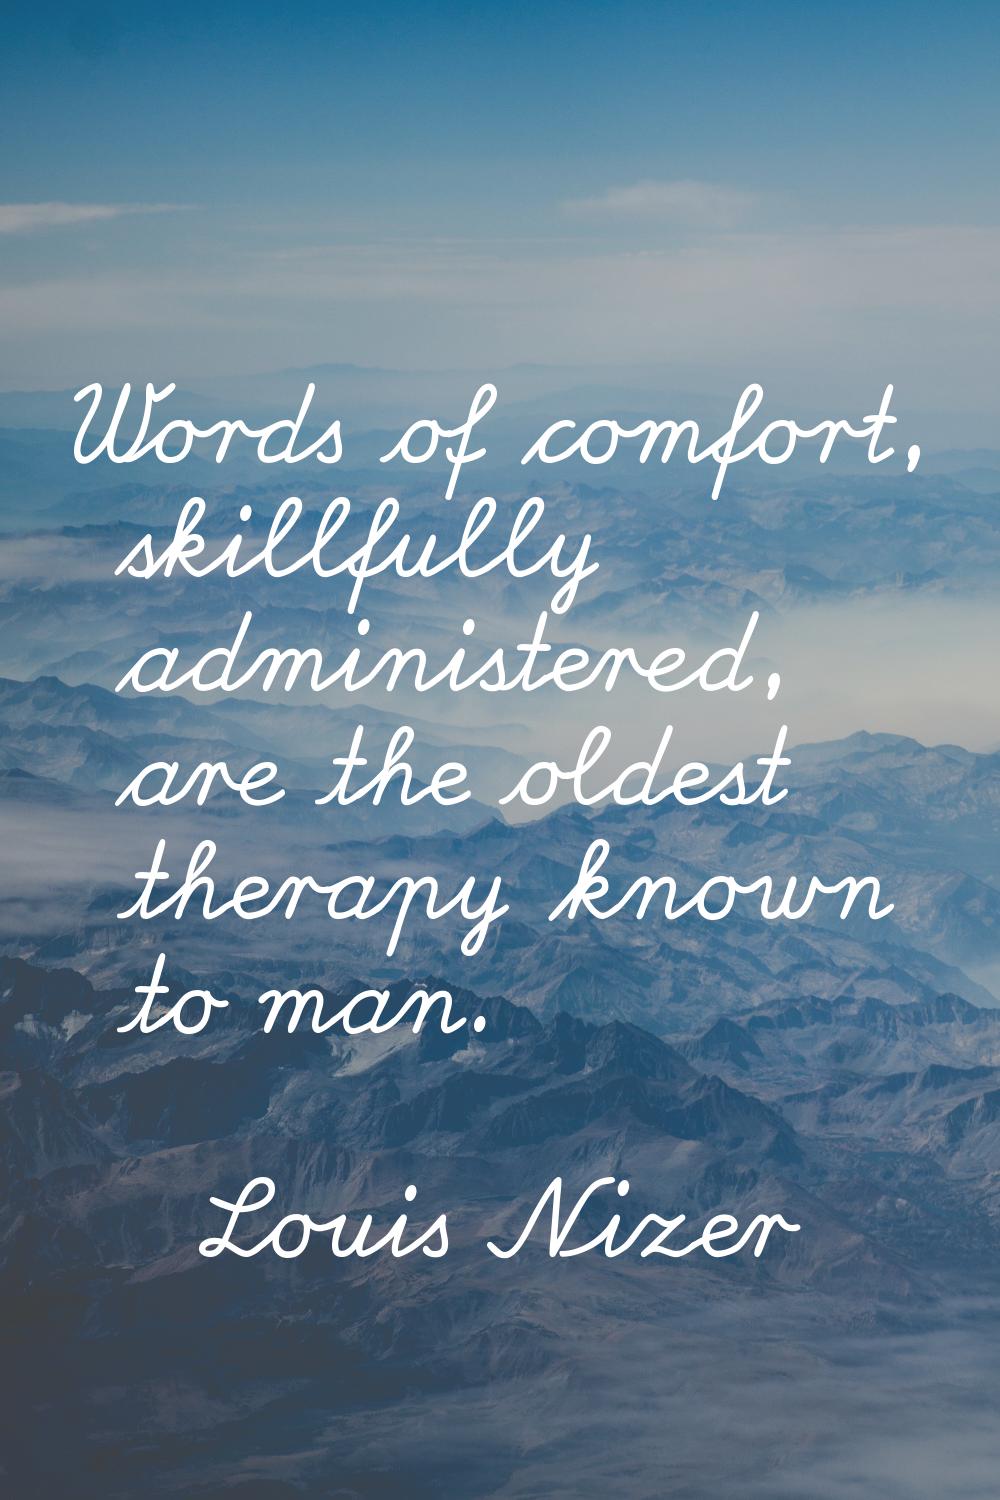 Words of comfort, skillfully administered, are the oldest therapy known to man.